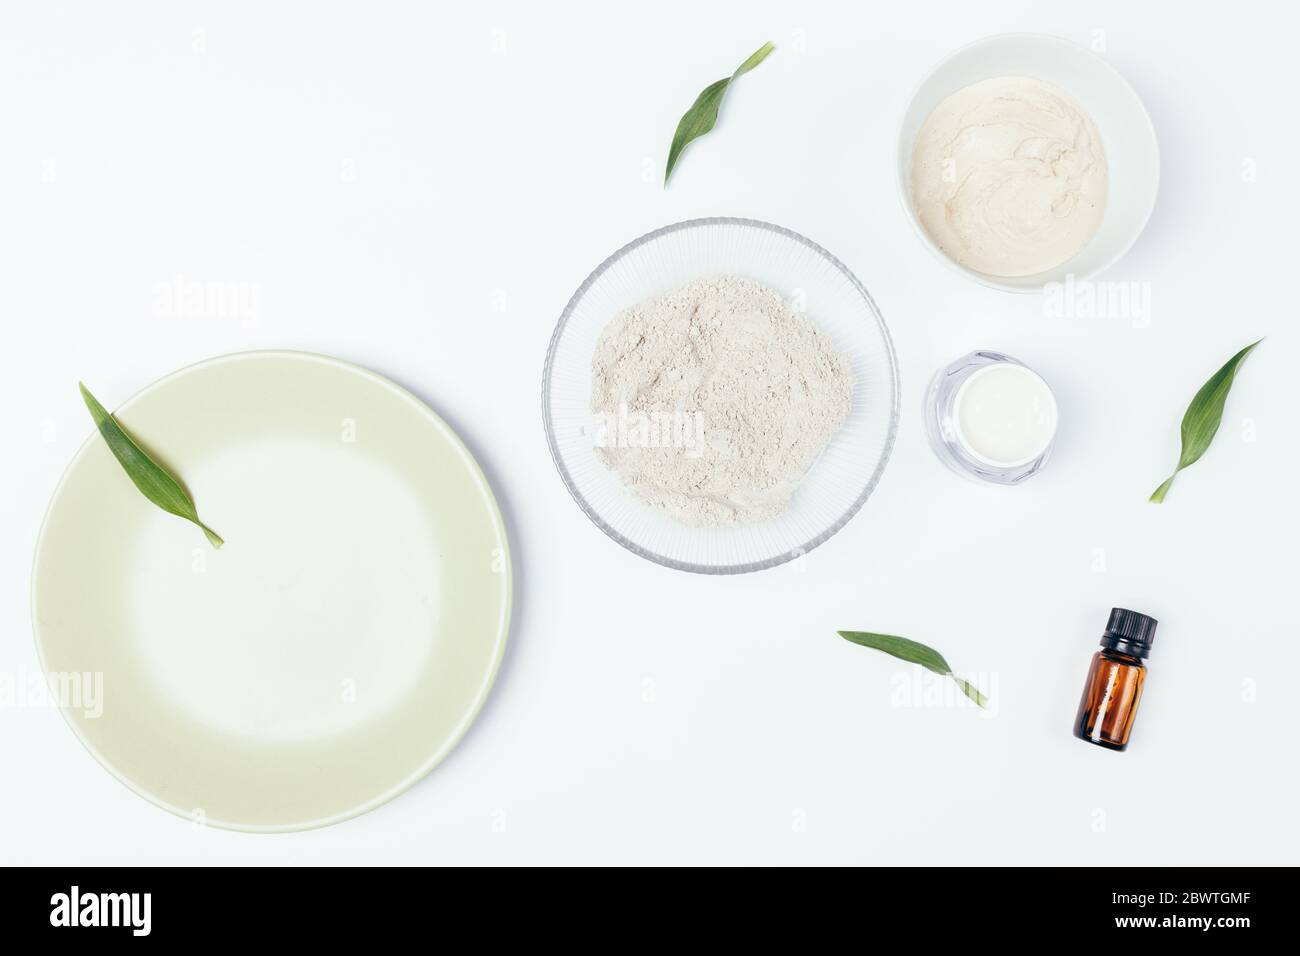 Ingredients for homemade beauty treatments, natural clay mask, moisturizer cream and aroma essence next to green leaves on white table, top view. Stock Photo